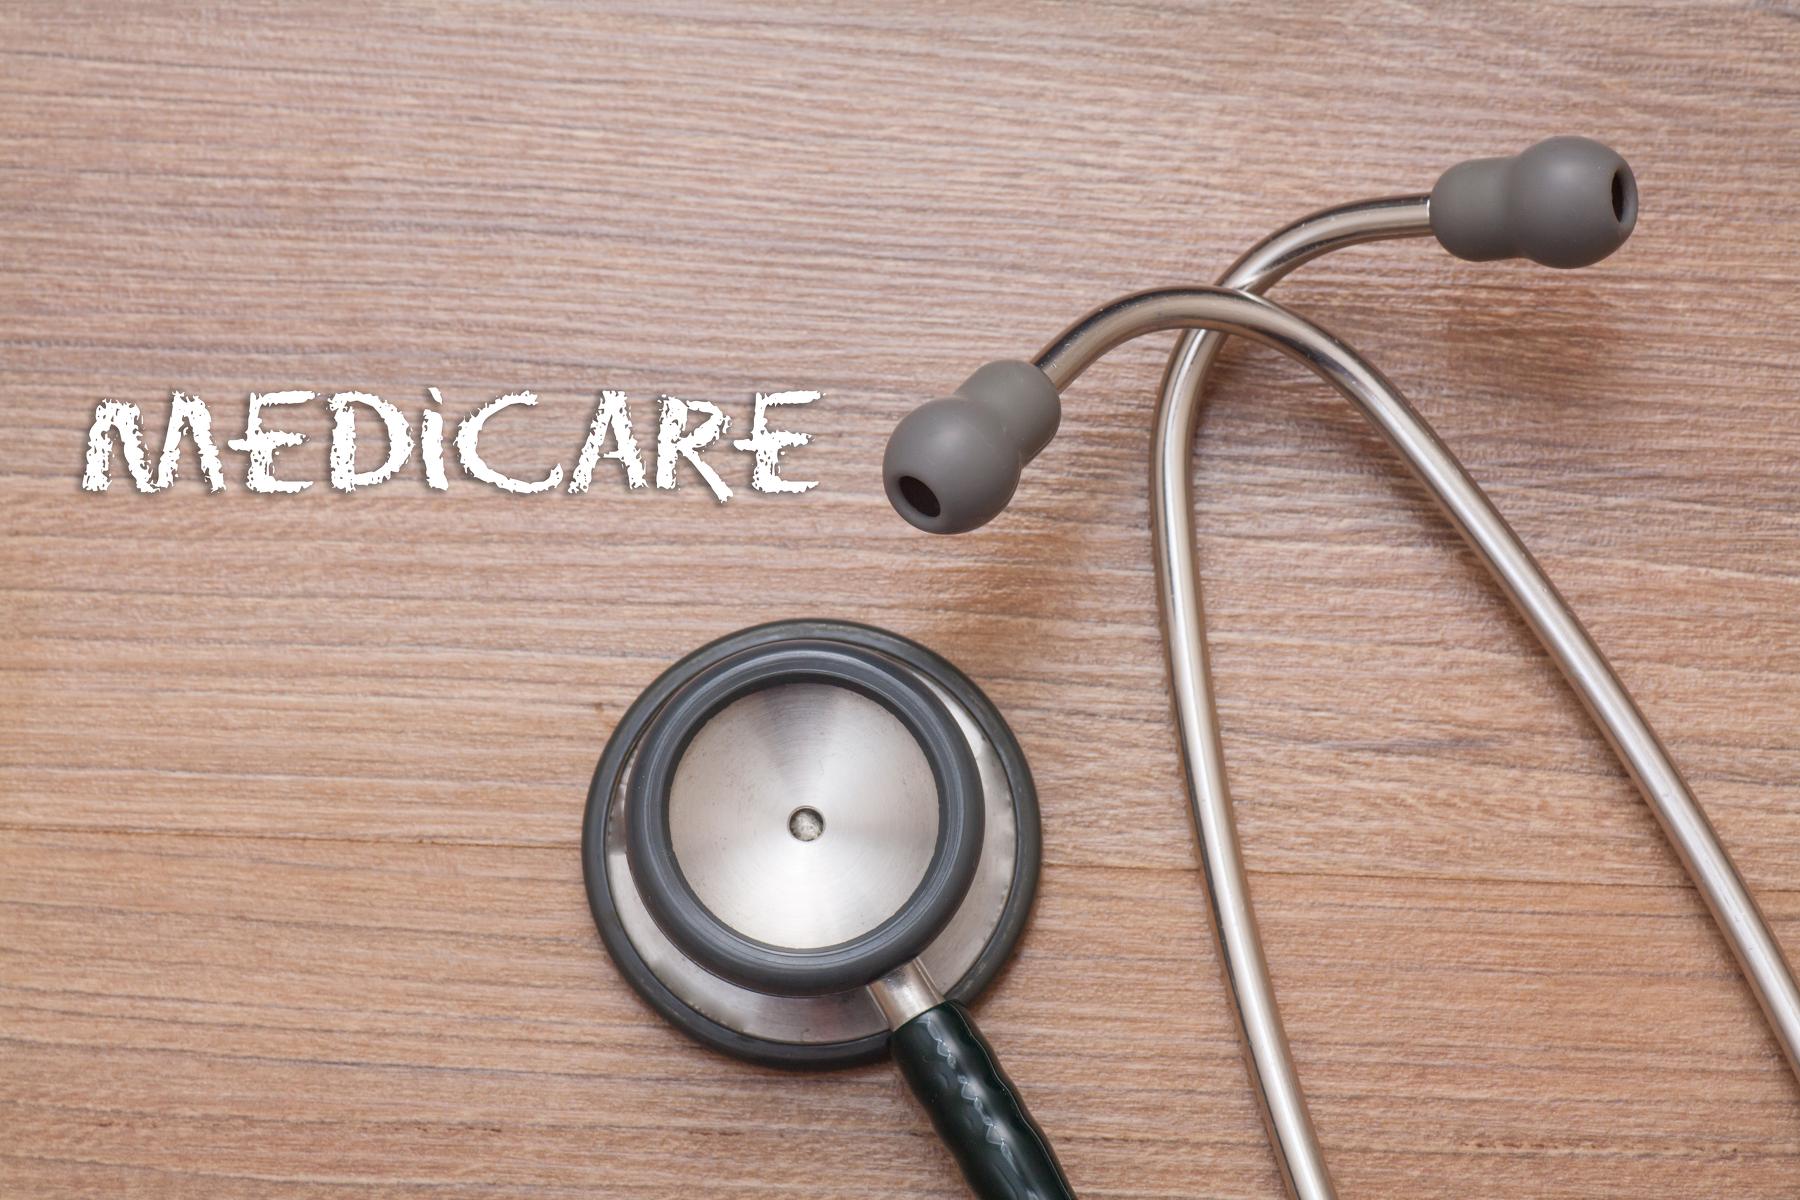 stethoscope image next to the word medicare